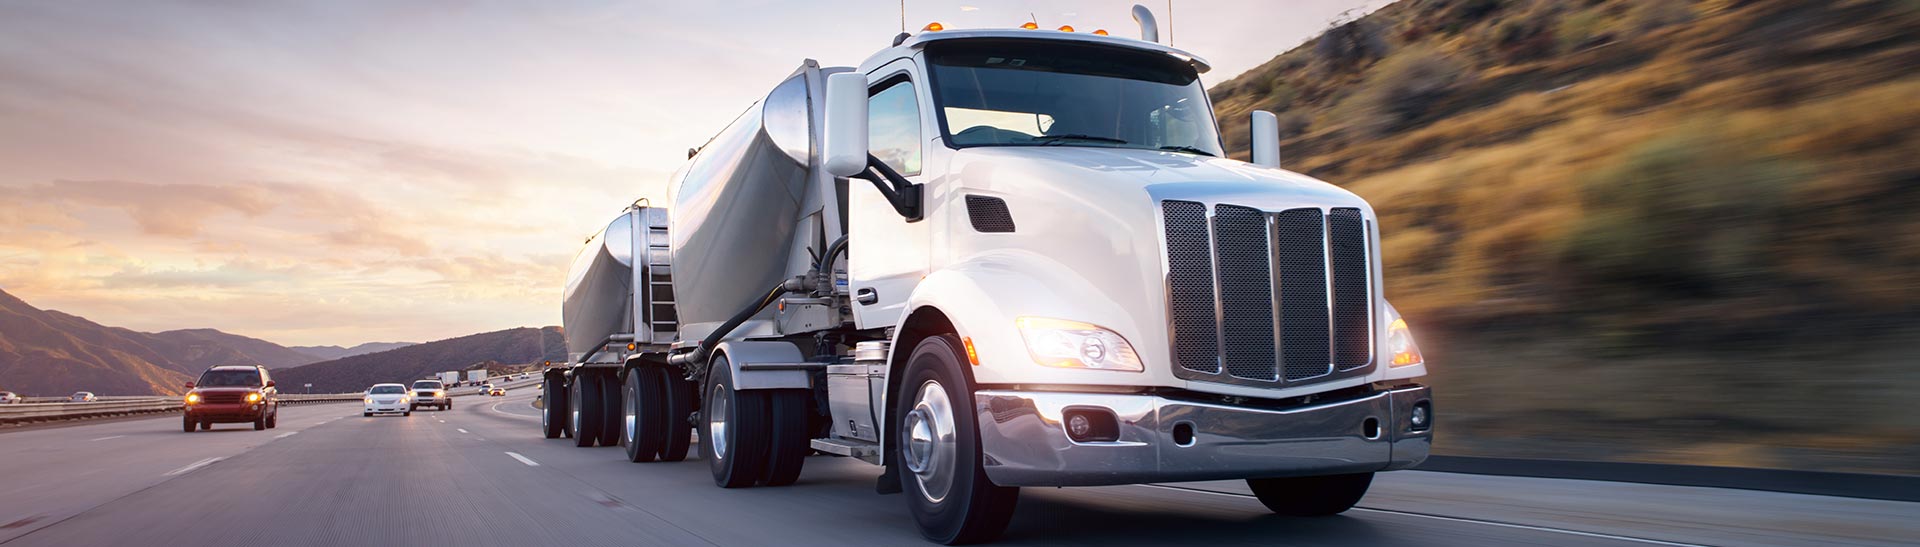 Joliet Trucking Company, Trucking Services and Intermodal Trucking